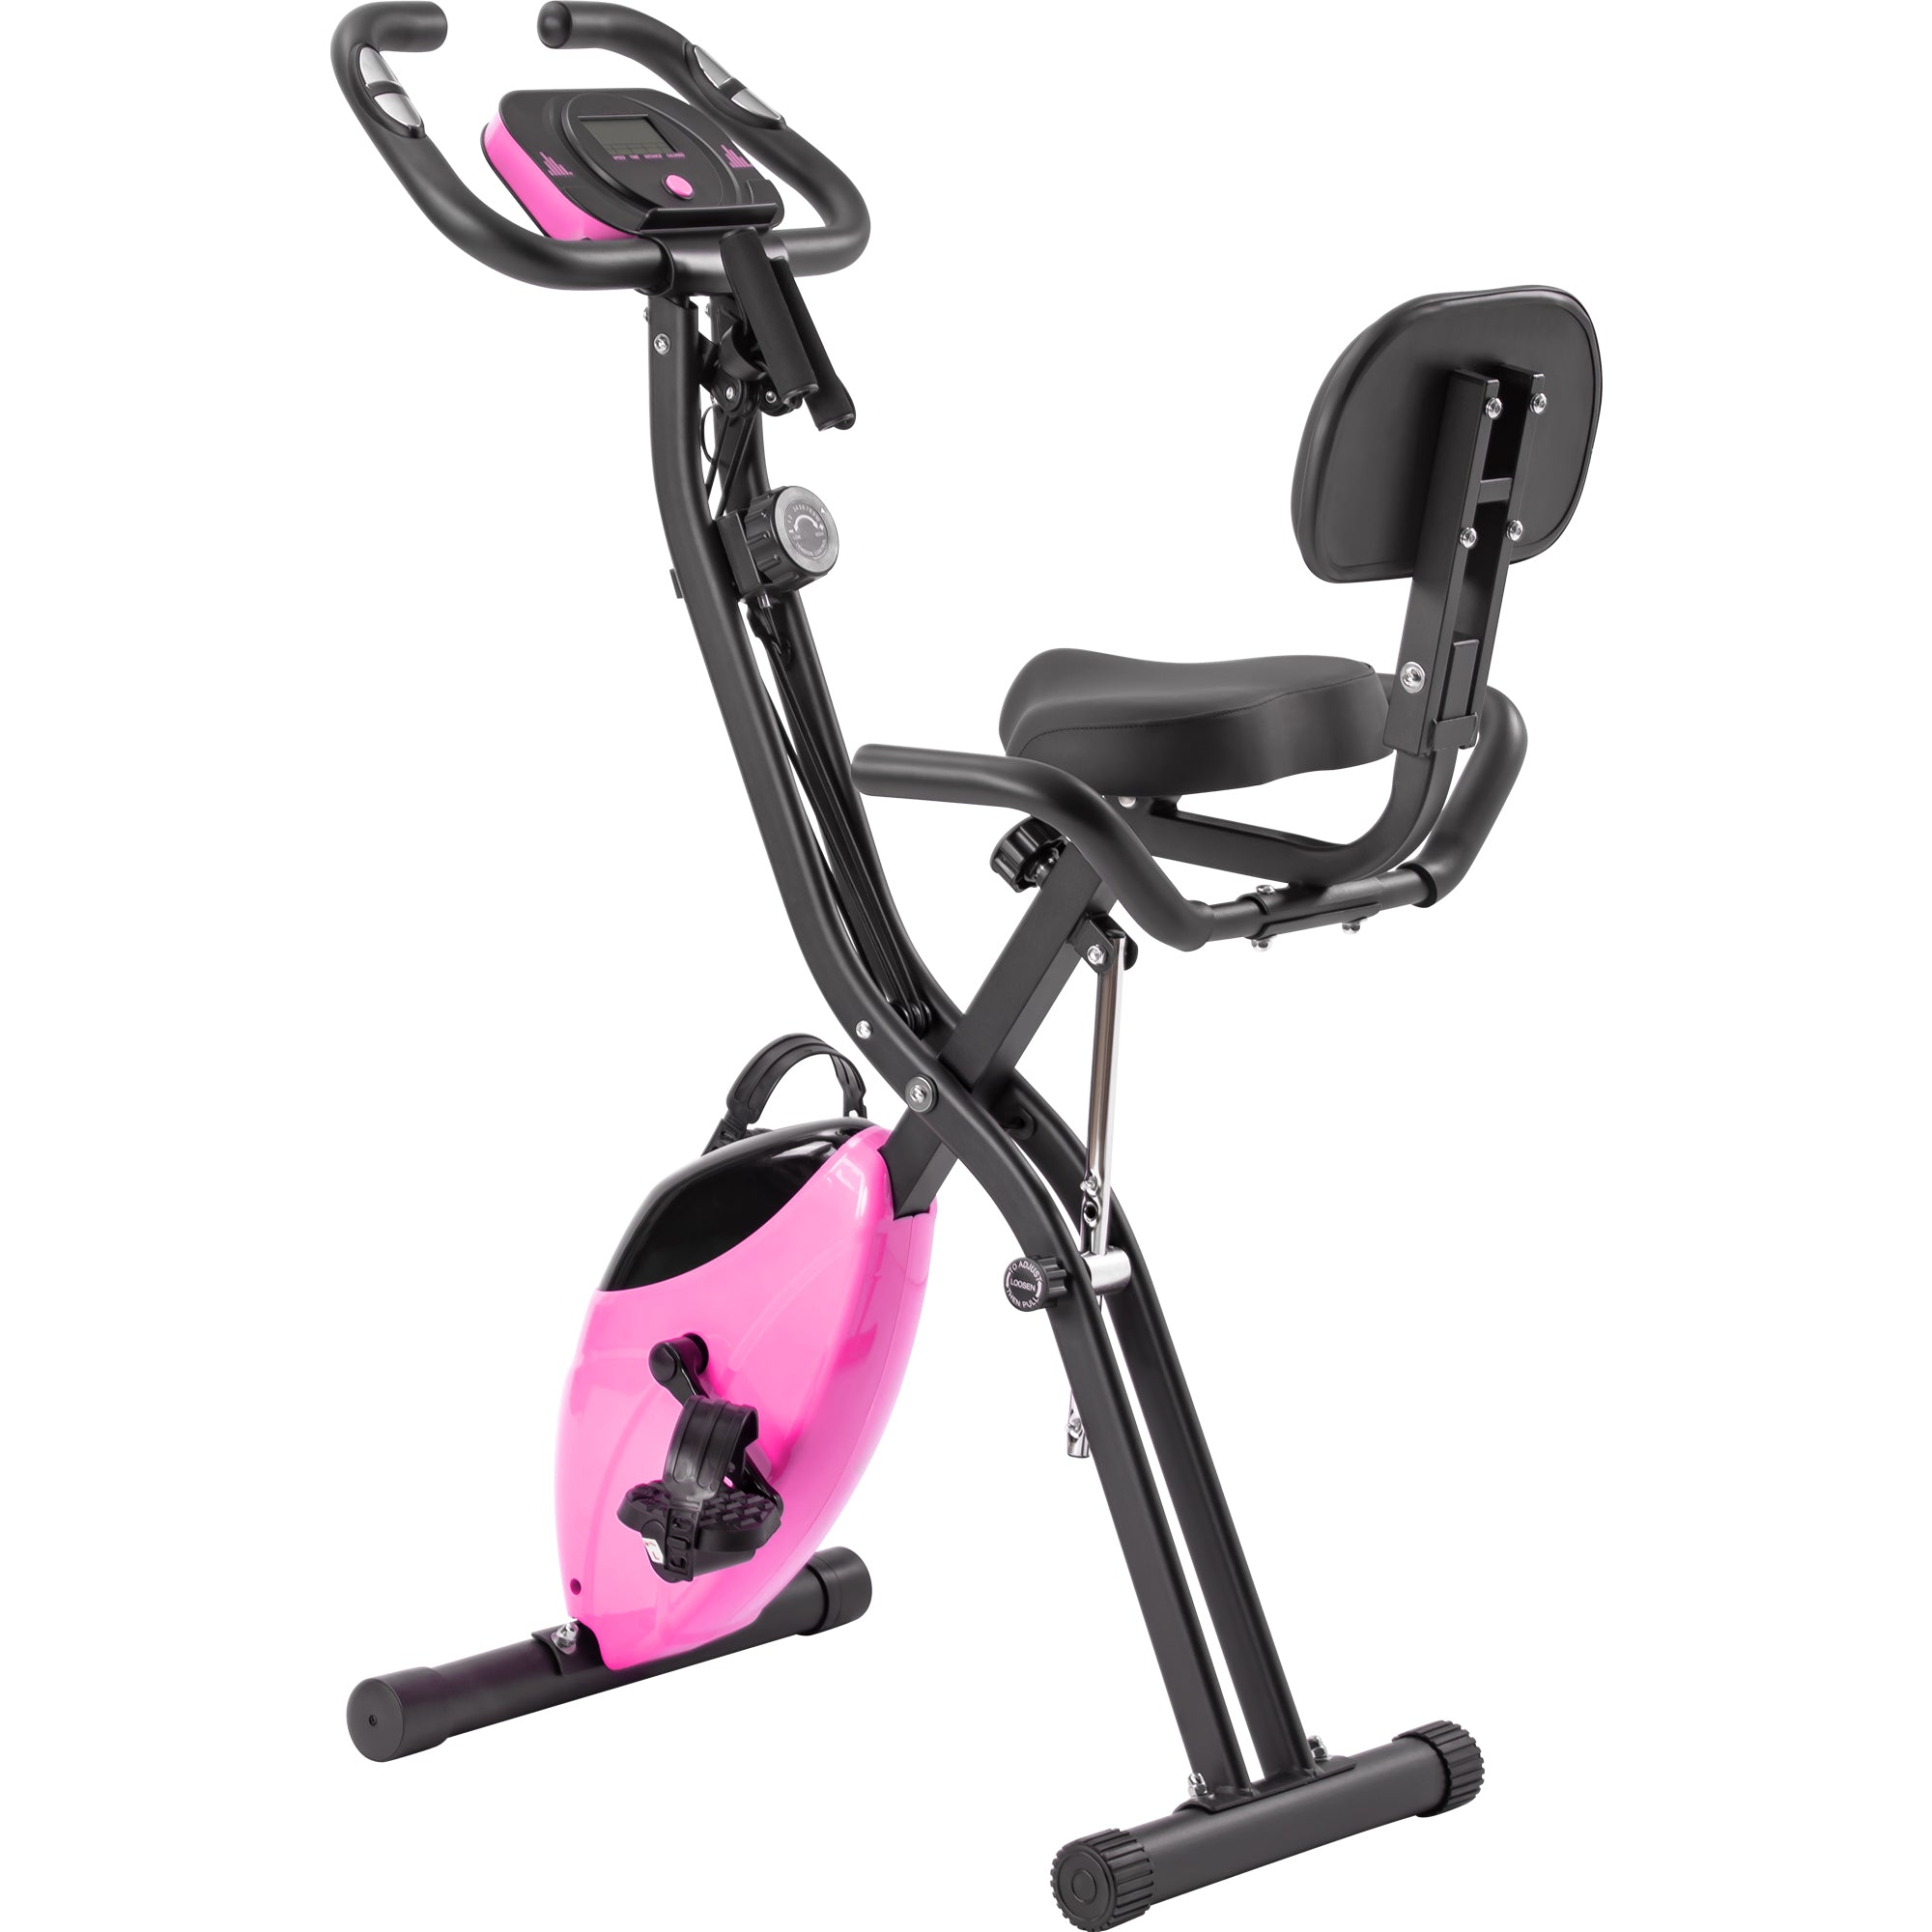 Folding Exercise Bike, Fitness Upright and Recumbent X pink-metal